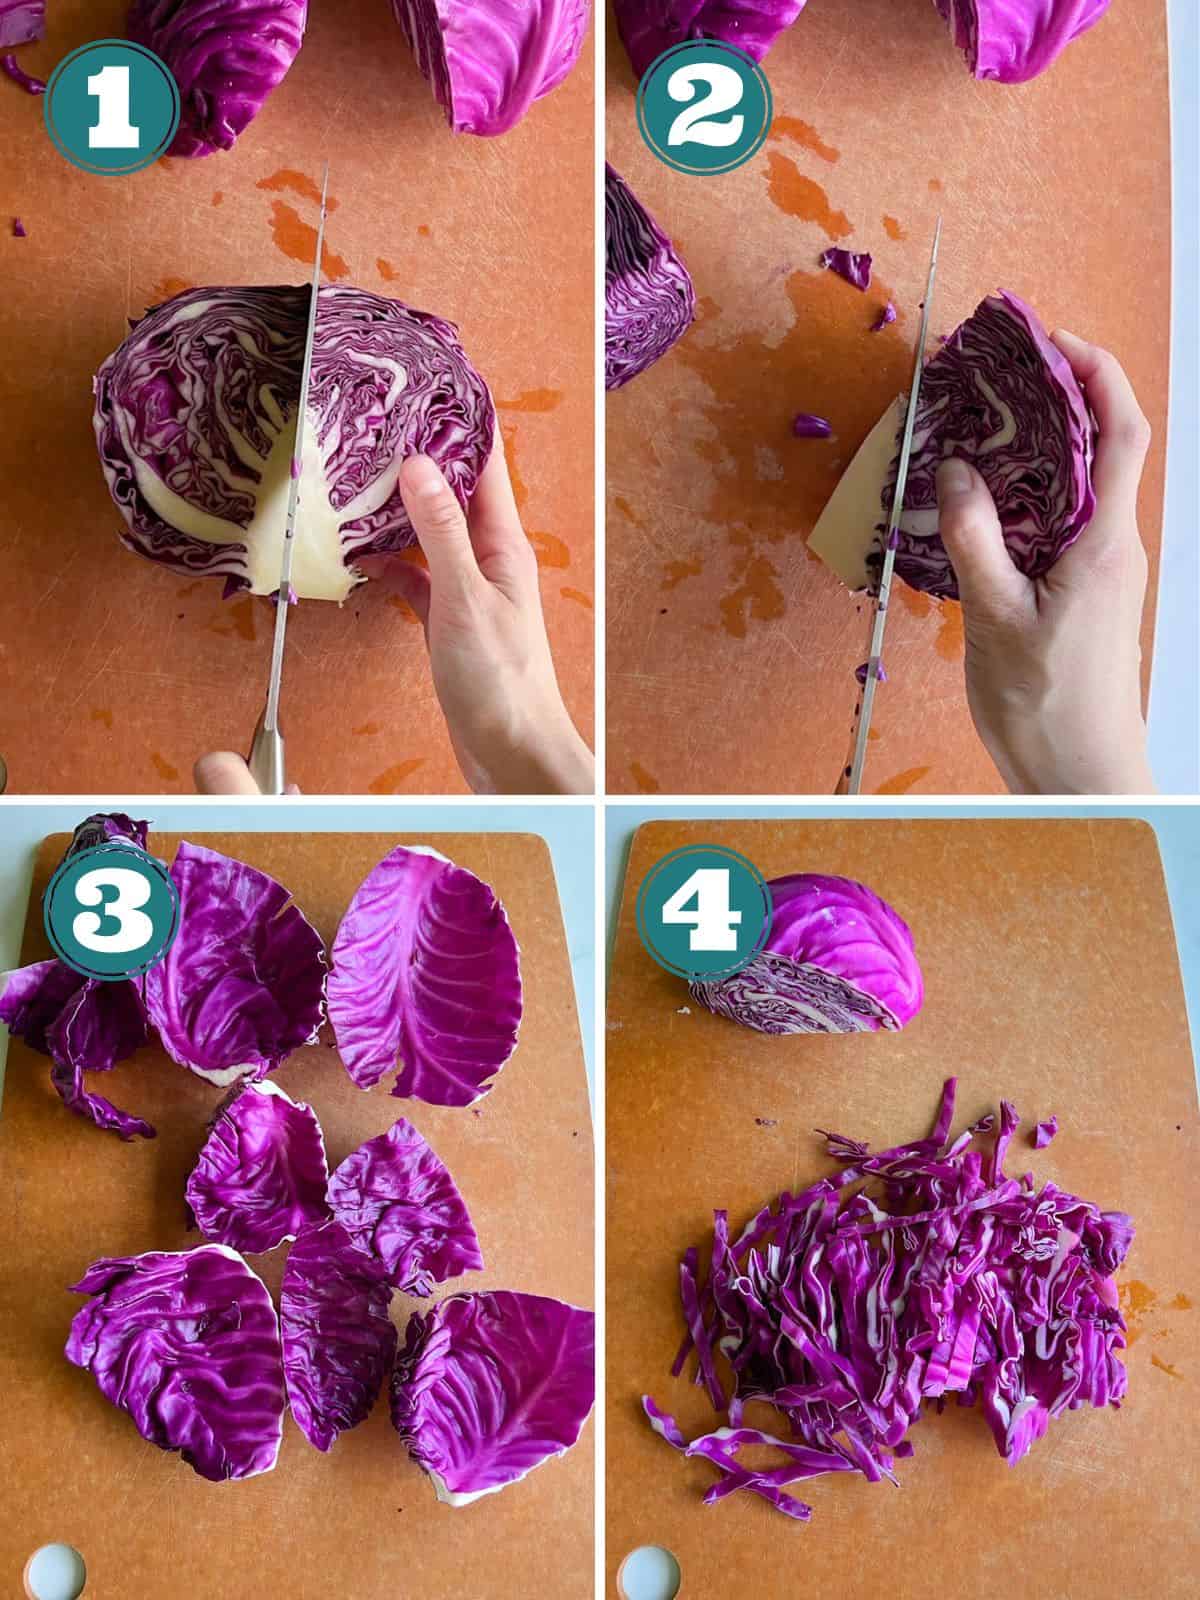 A four image collage showing how to slice a head of cabbage.